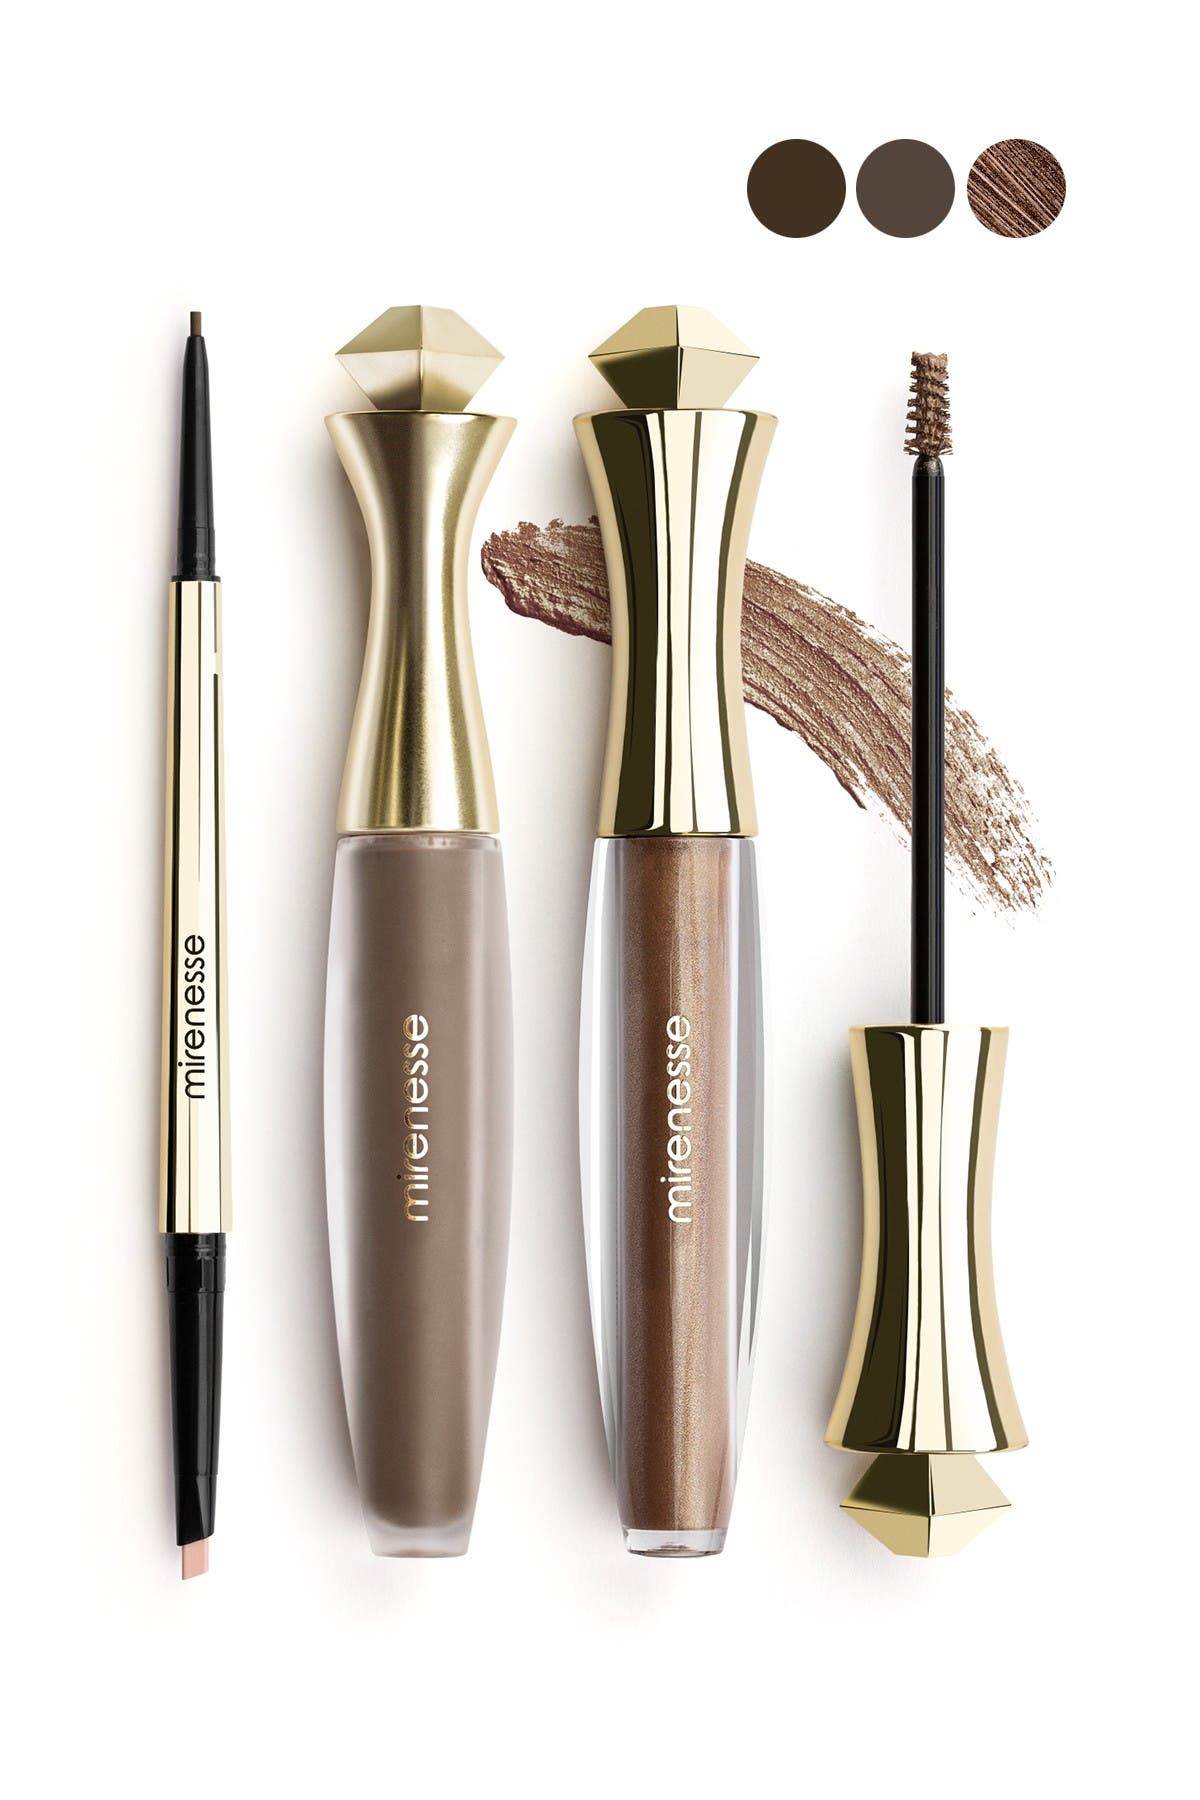 All-Day 3-Piece Master Perfect Brows Set - Dark Brown Mirenesse